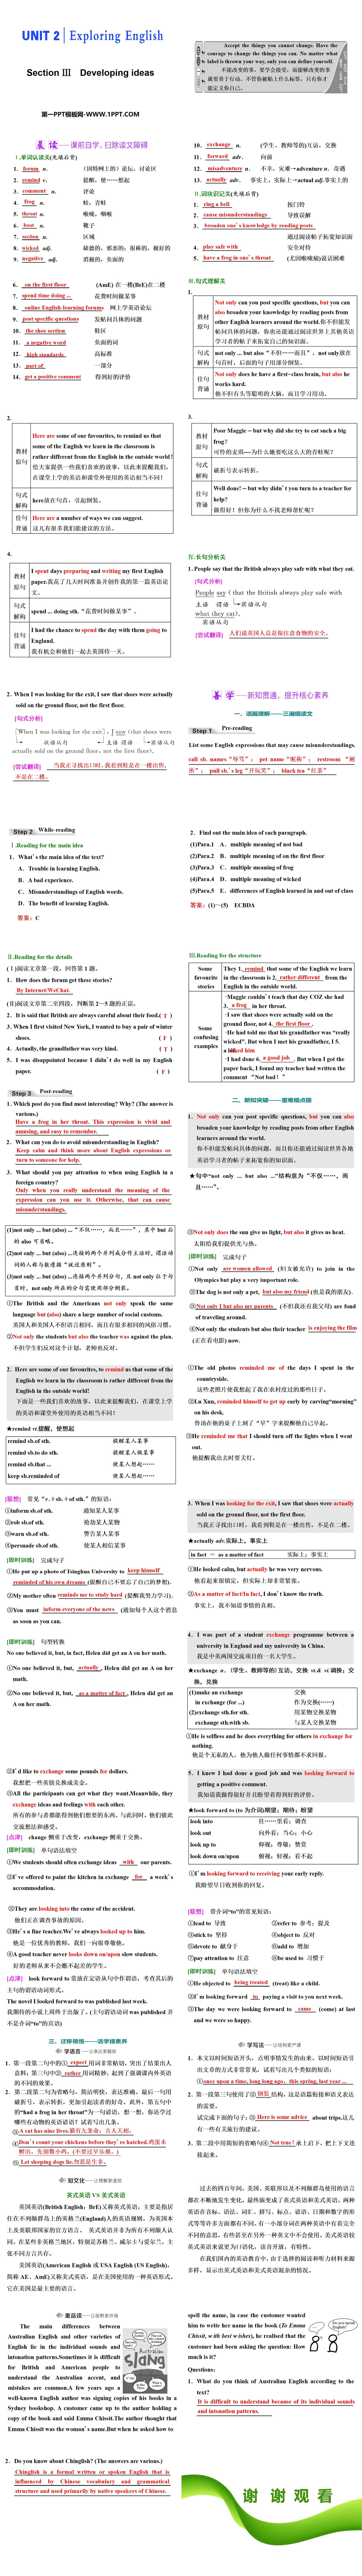 《Exploring English》Section ⅢPPT课件
（2）